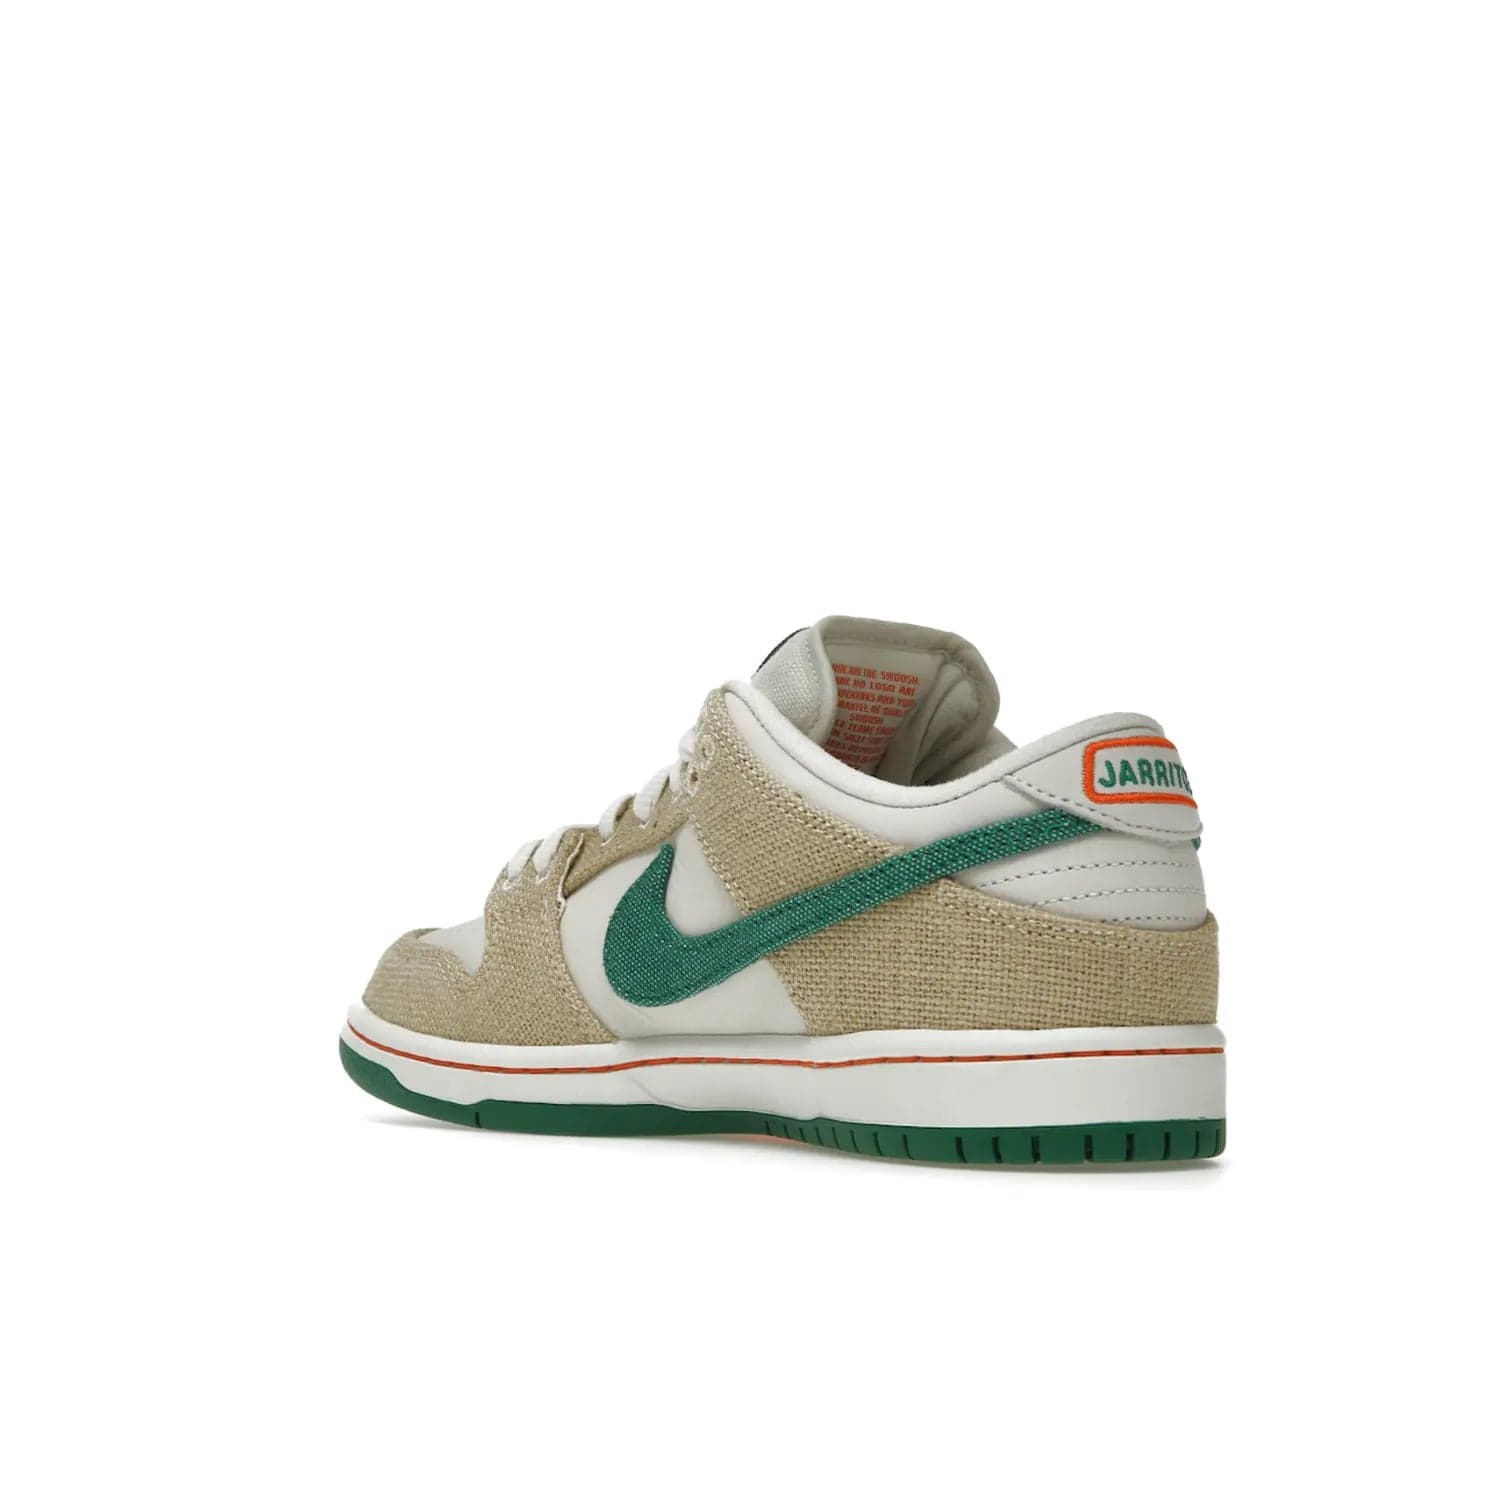 Nike SB Dunk Low Jarritos - Image 24 - Only at www.BallersClubKickz.com - Shop limited edition Nike SB Dunk Low Jarritos! Crafted with white leather and tear-away canvas materials with green accents. Includes orange, green, and white laces to customize your look. Available now.